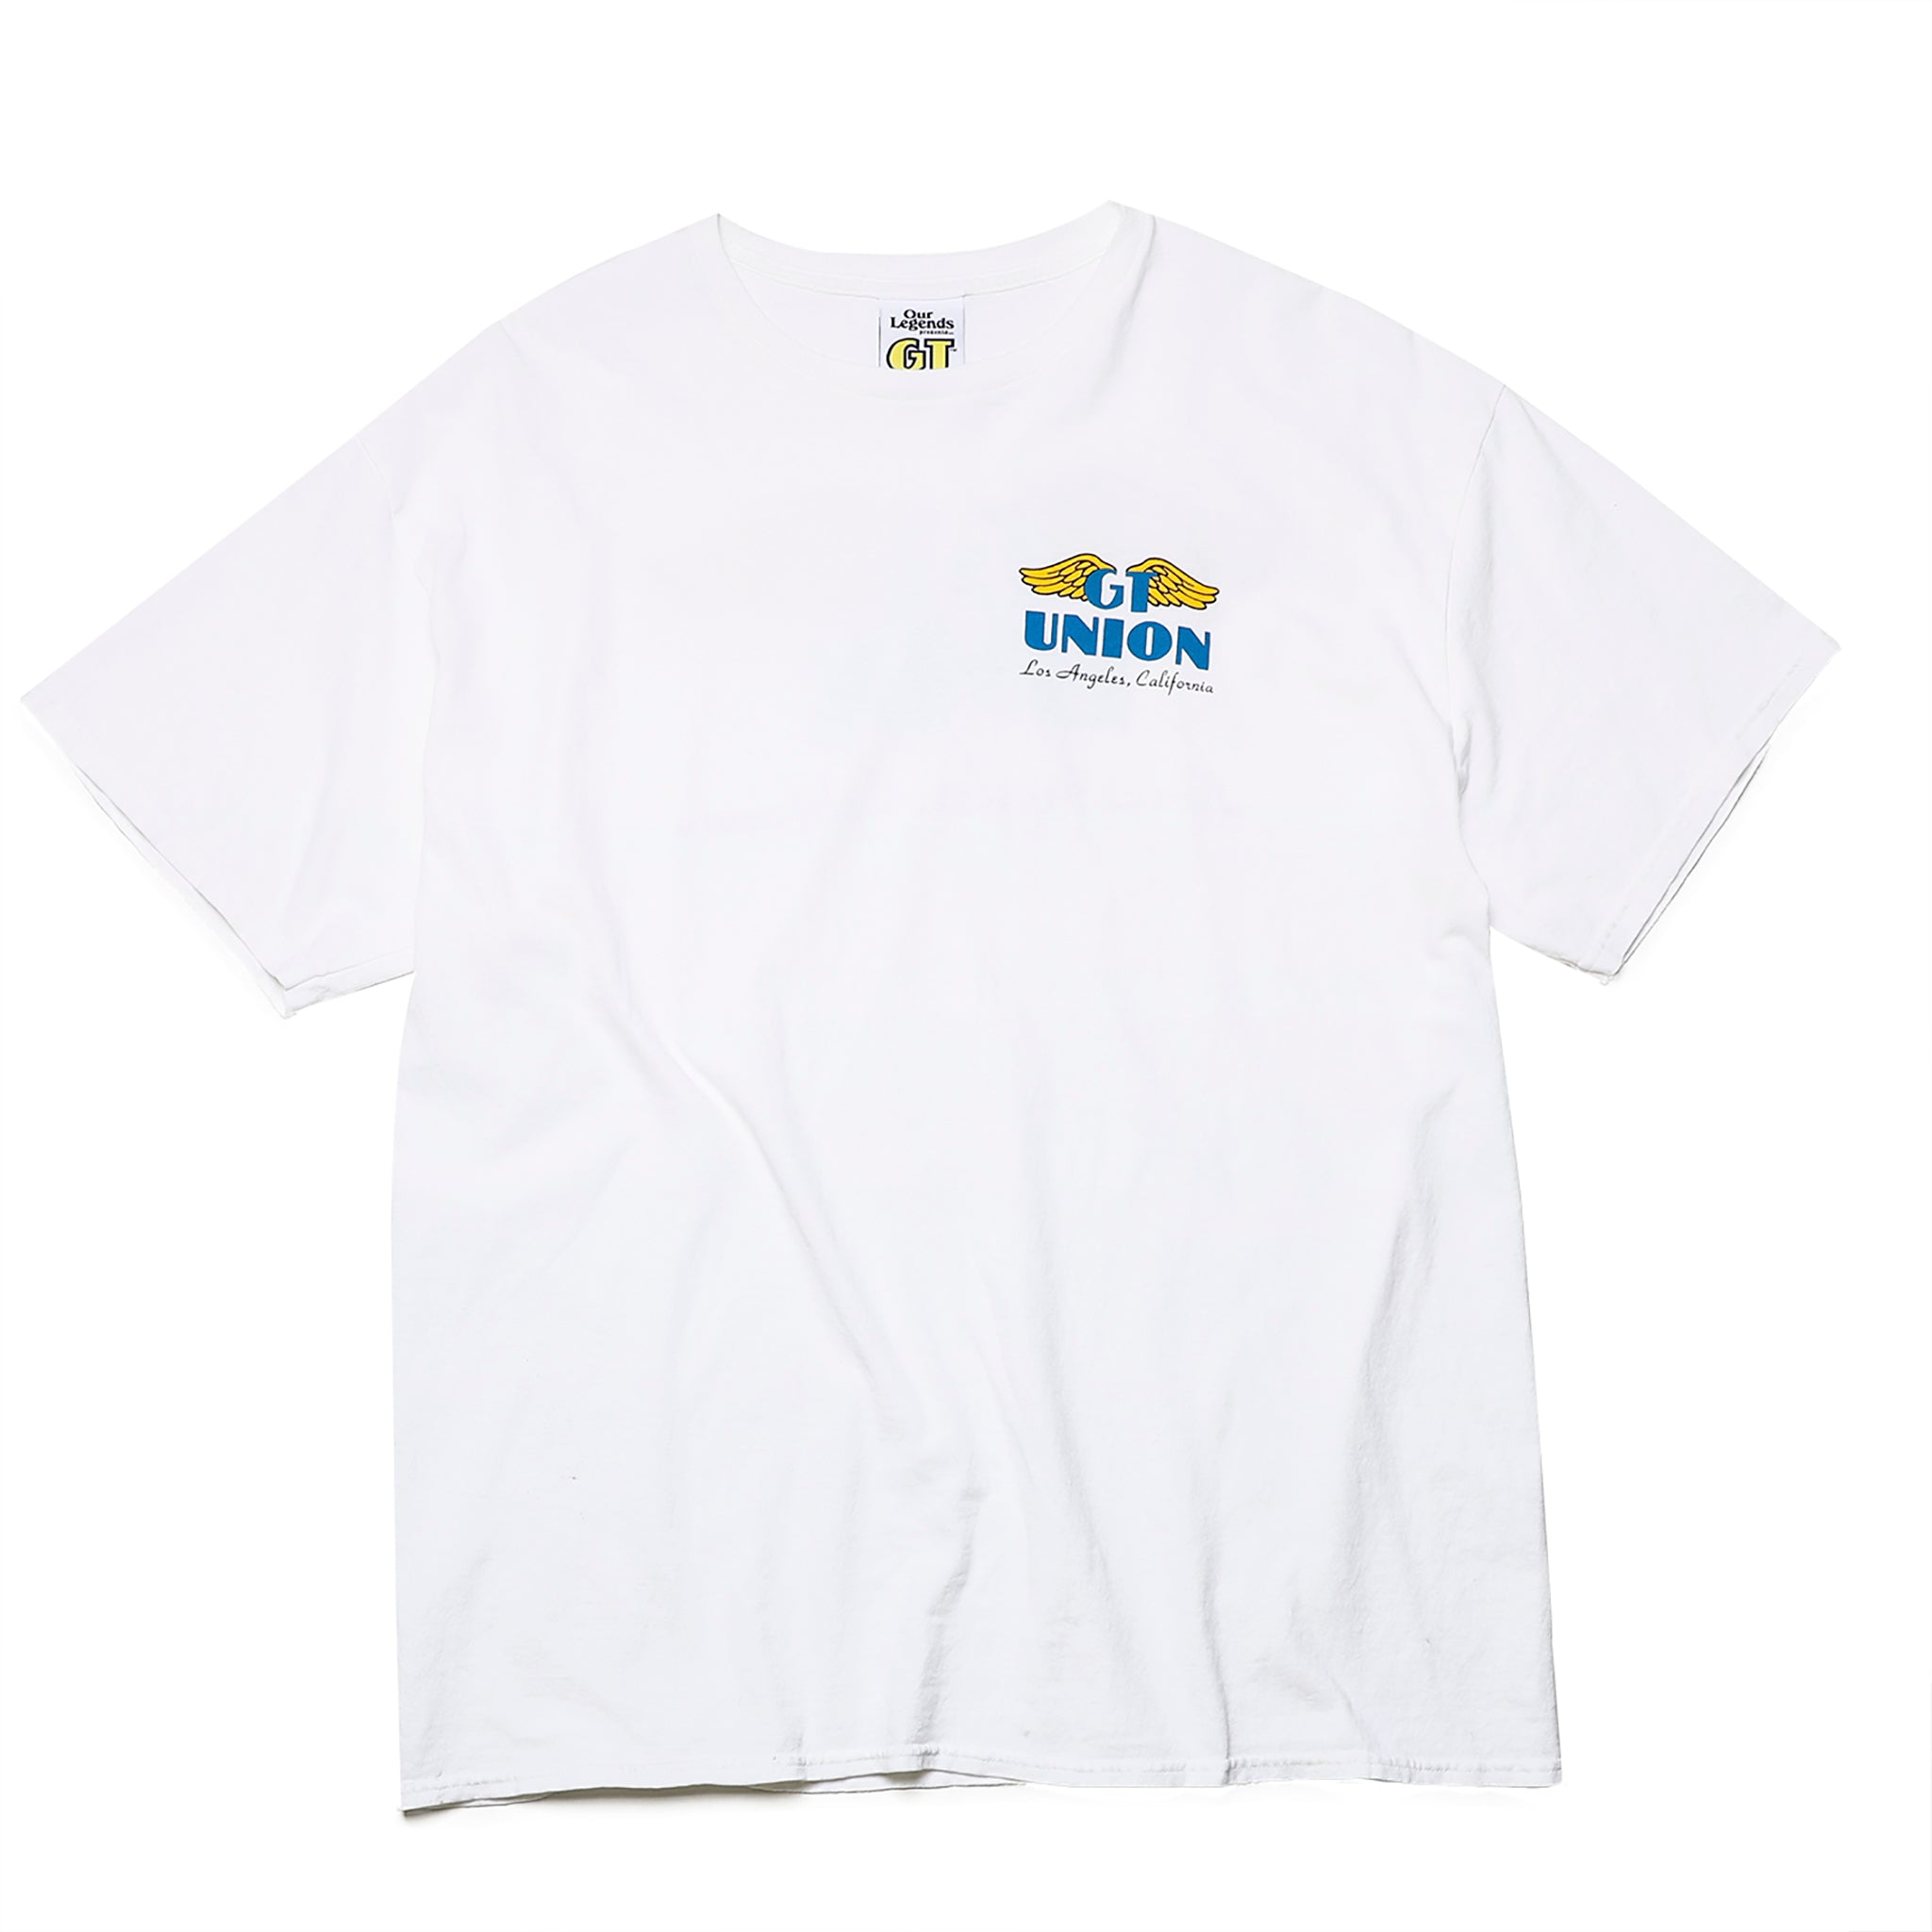 GT x UNION Wings Tee - White